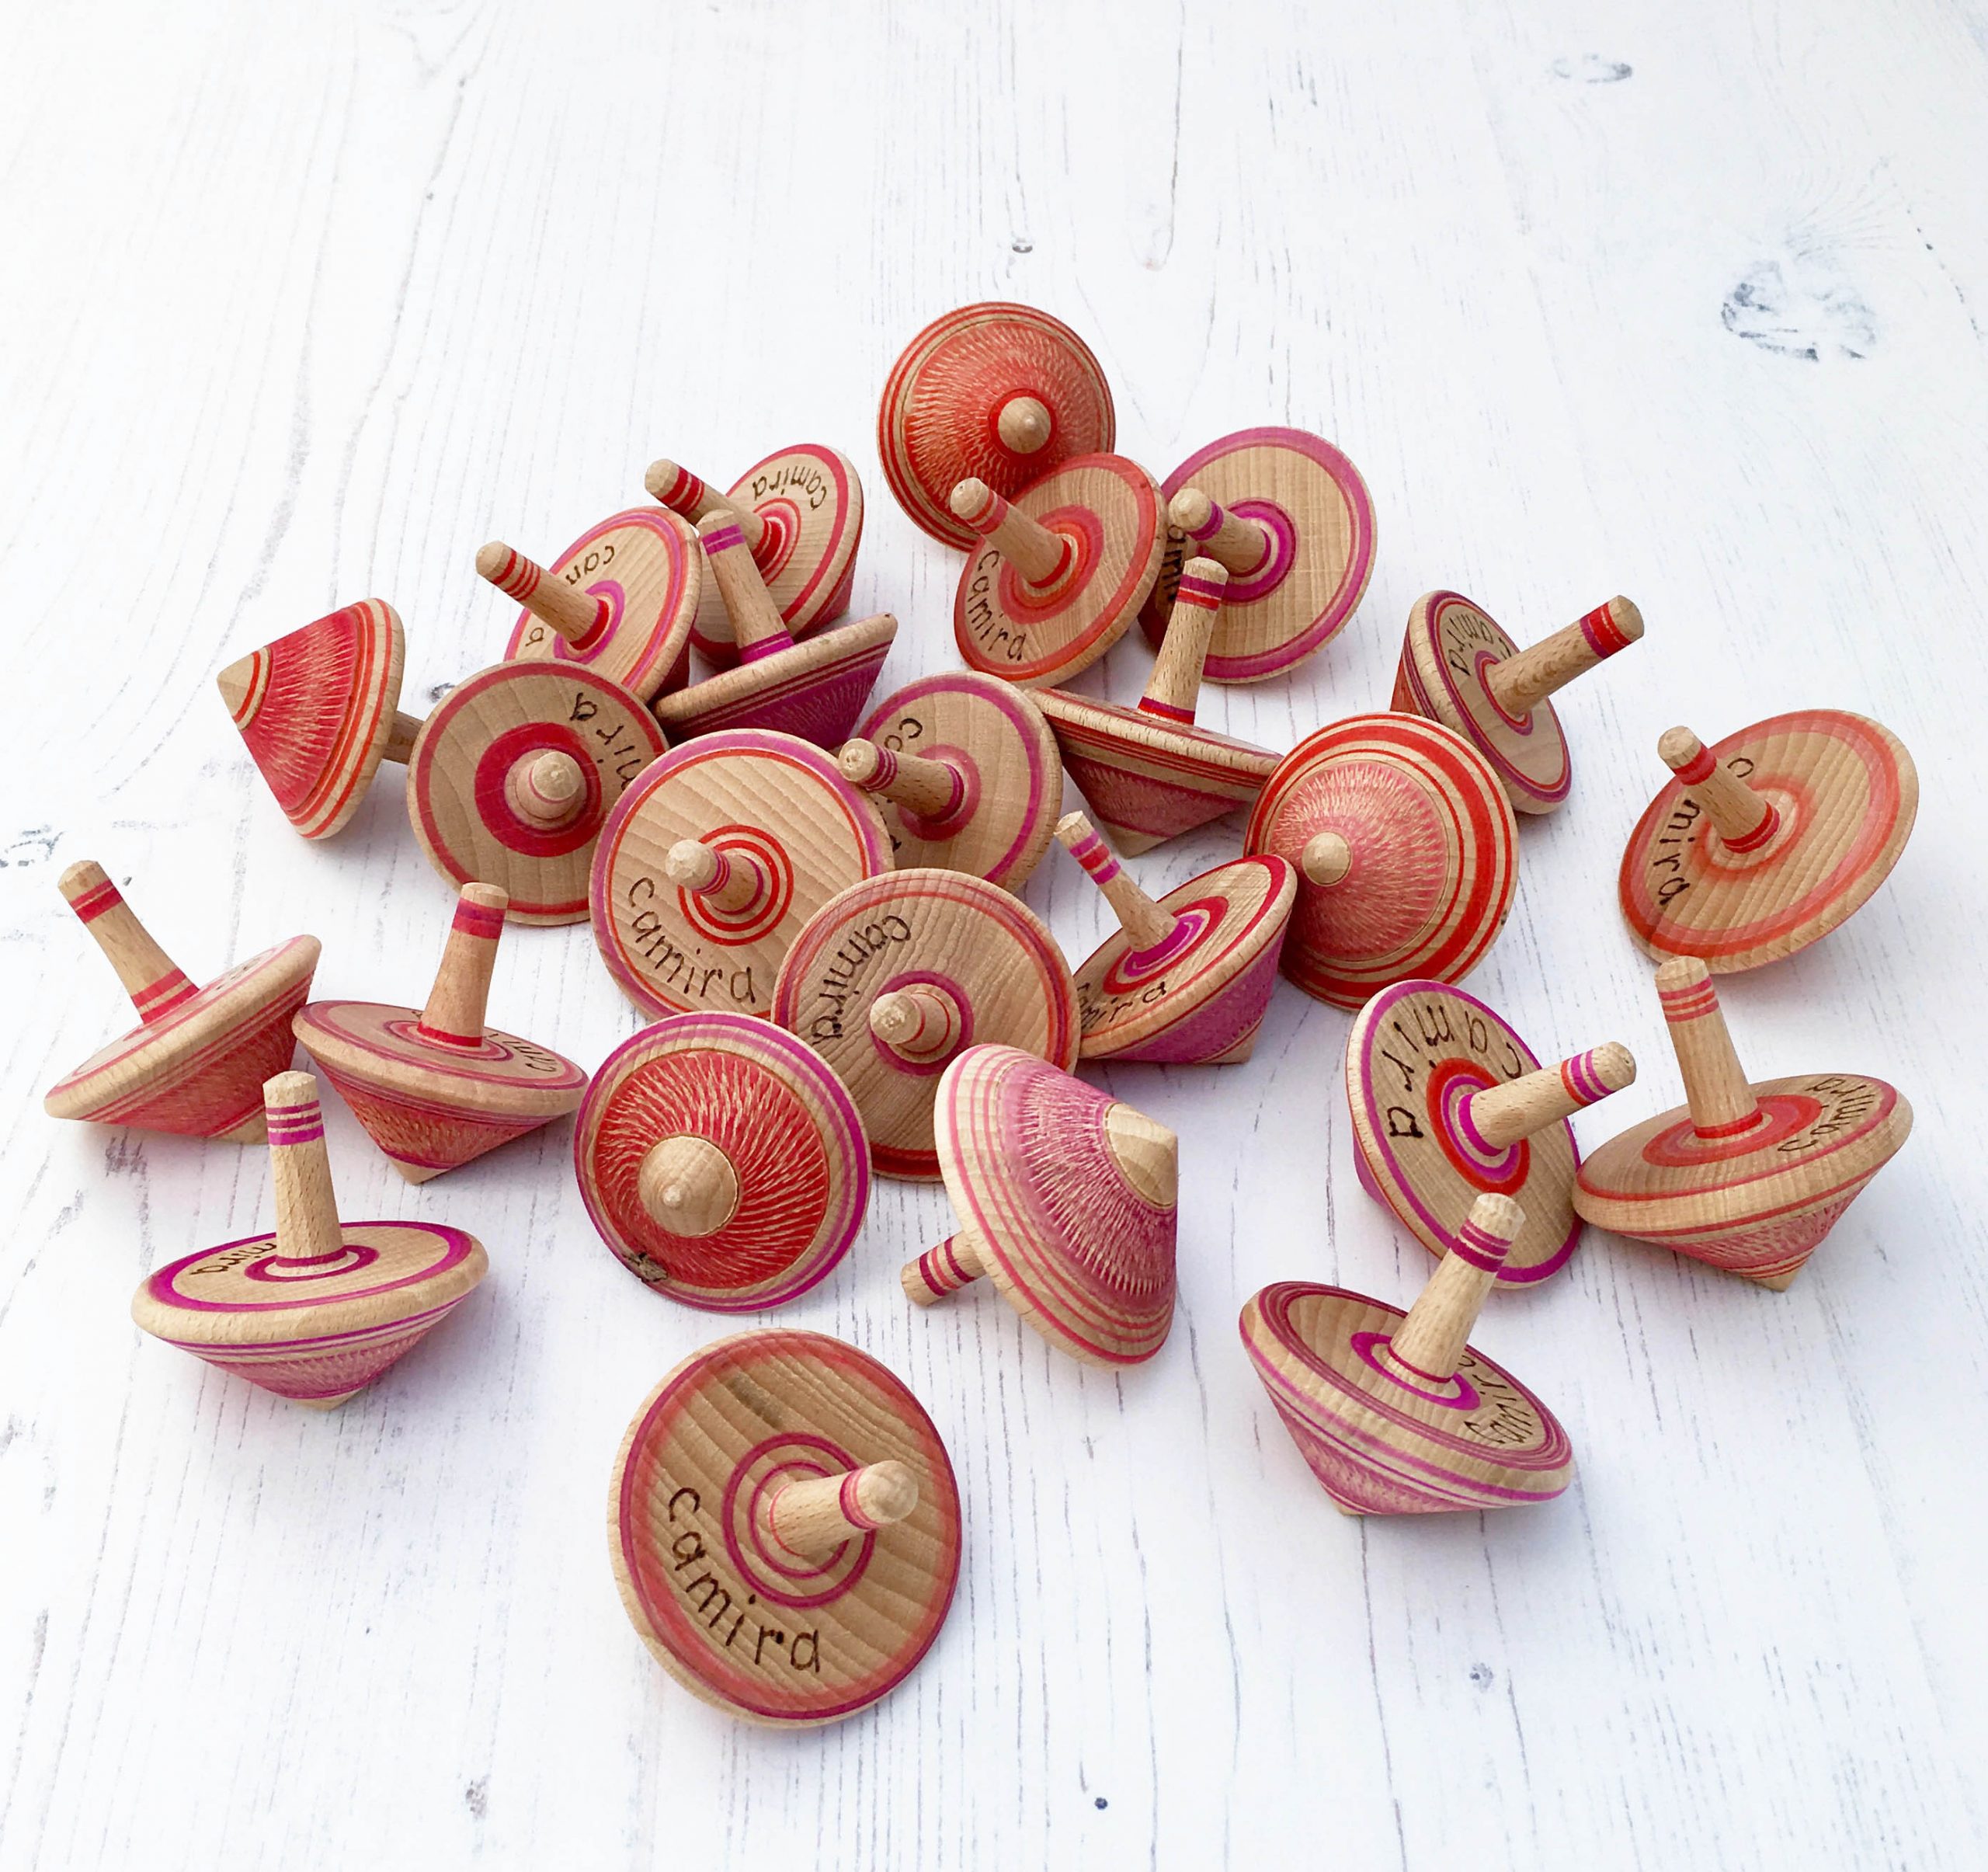 eco friendly promotional products wooden spinning tops